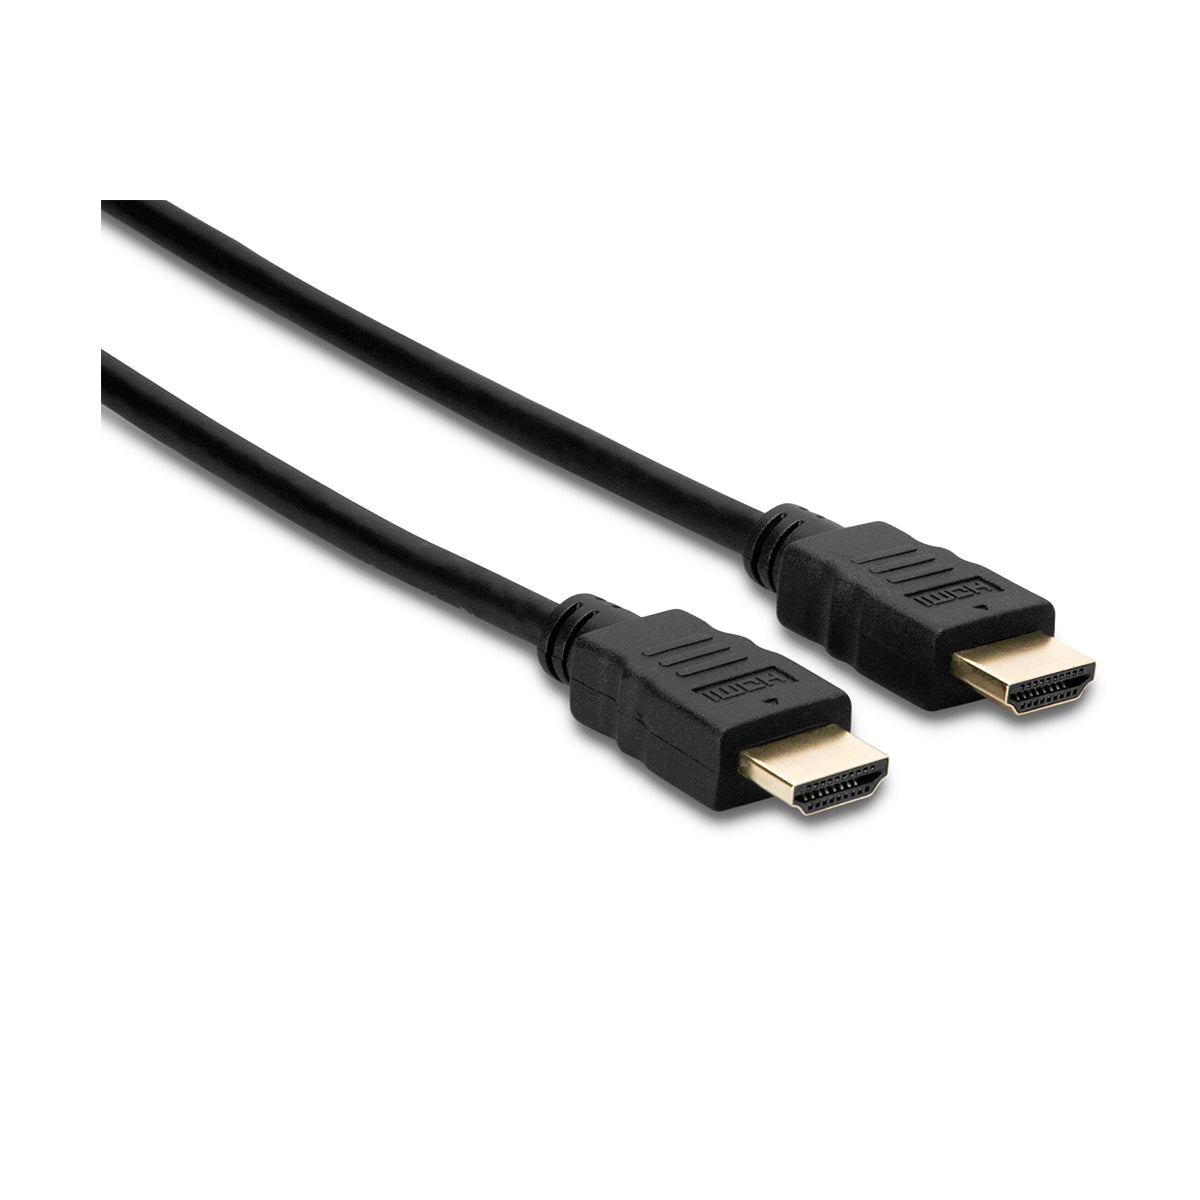 Hosa High Speed HDMI Cable - HDMI to HDMI, 3 ft